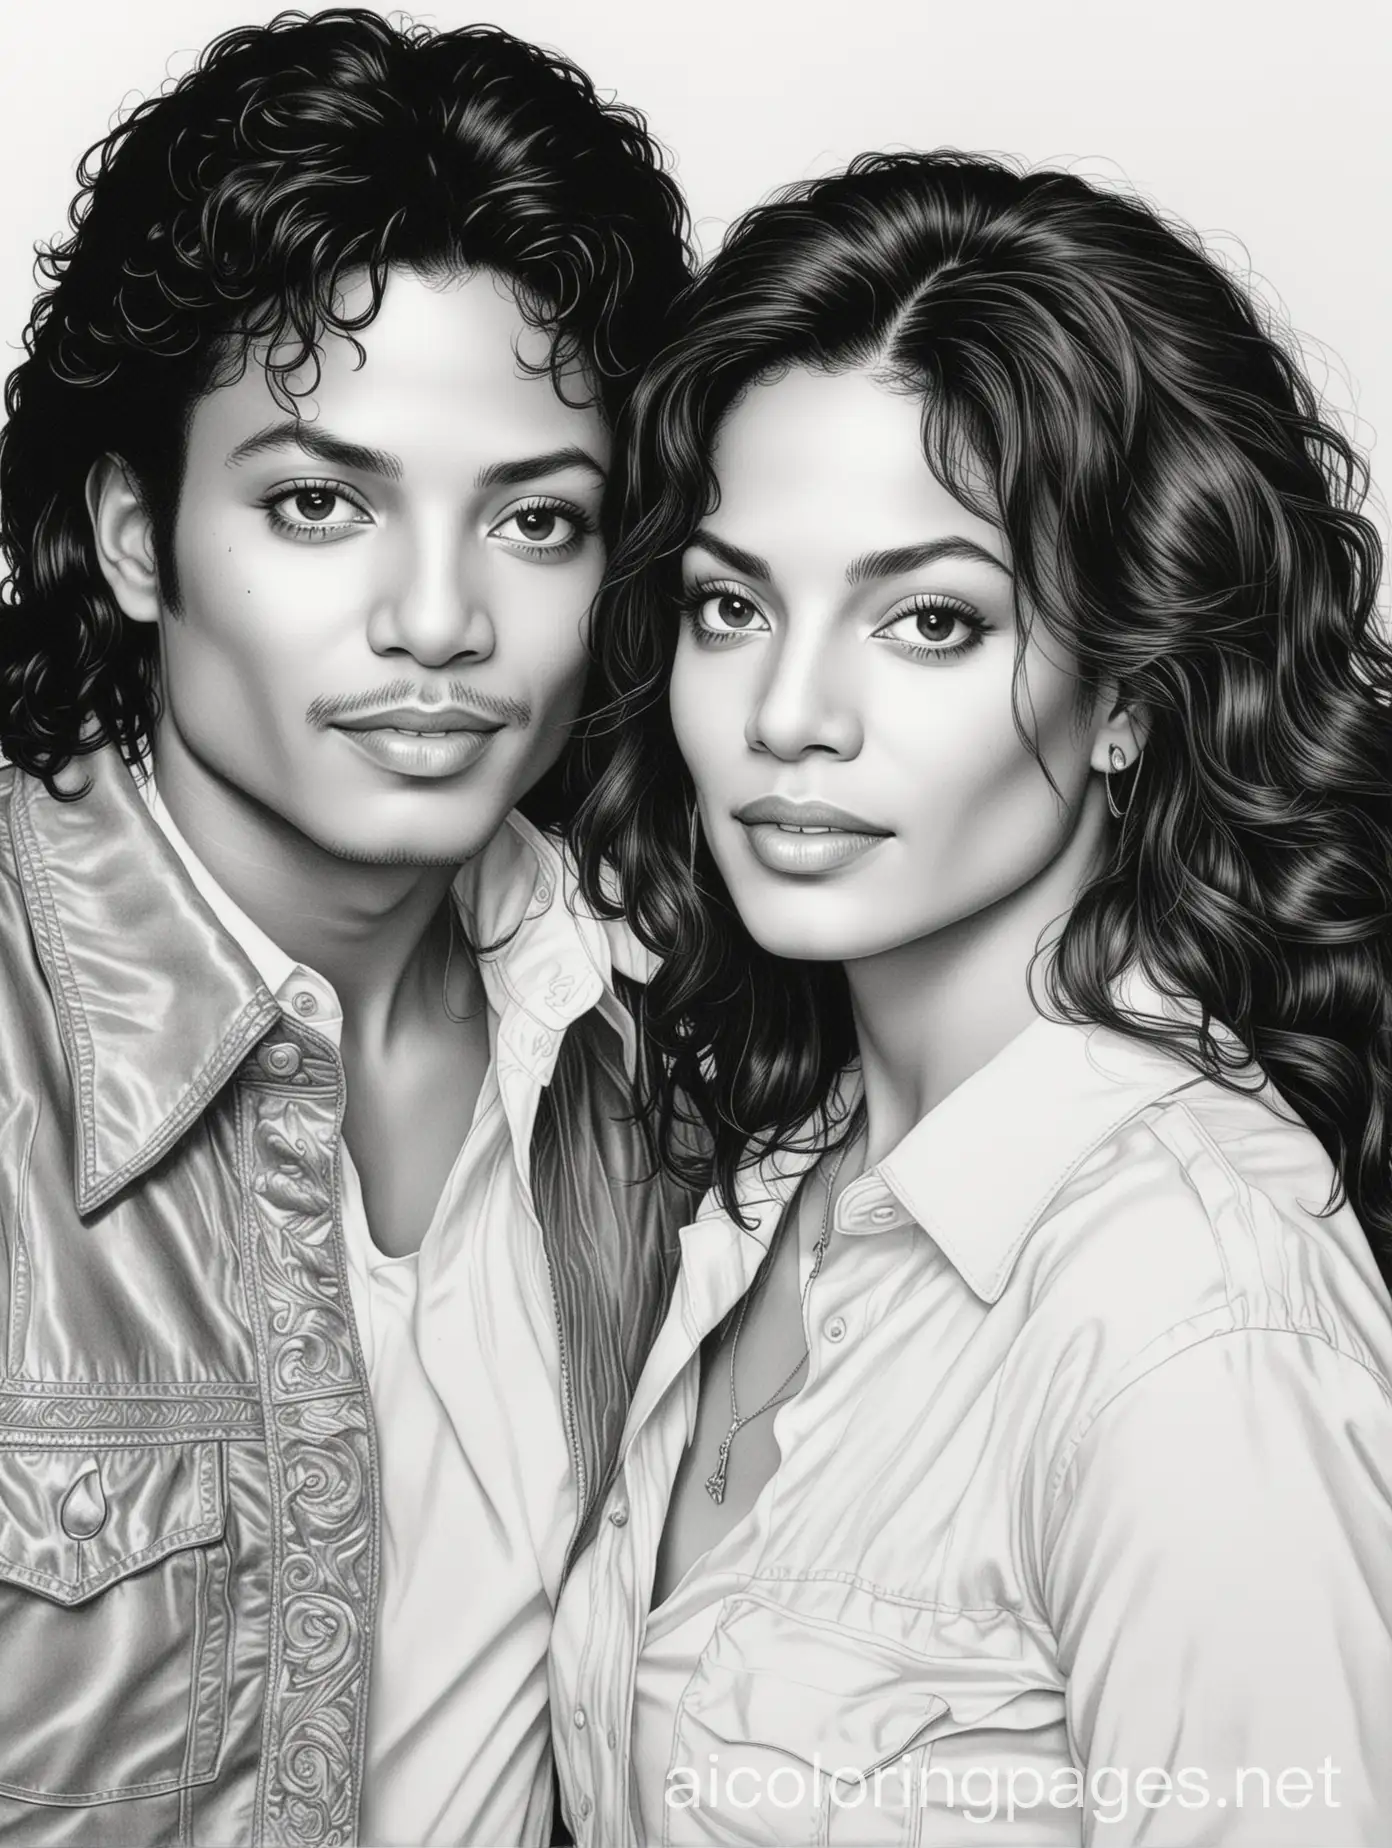 Michael-Jackson-and-Maripily-Rivera-Coloring-Page-Black-and-White-Line-Art-on-White-Background